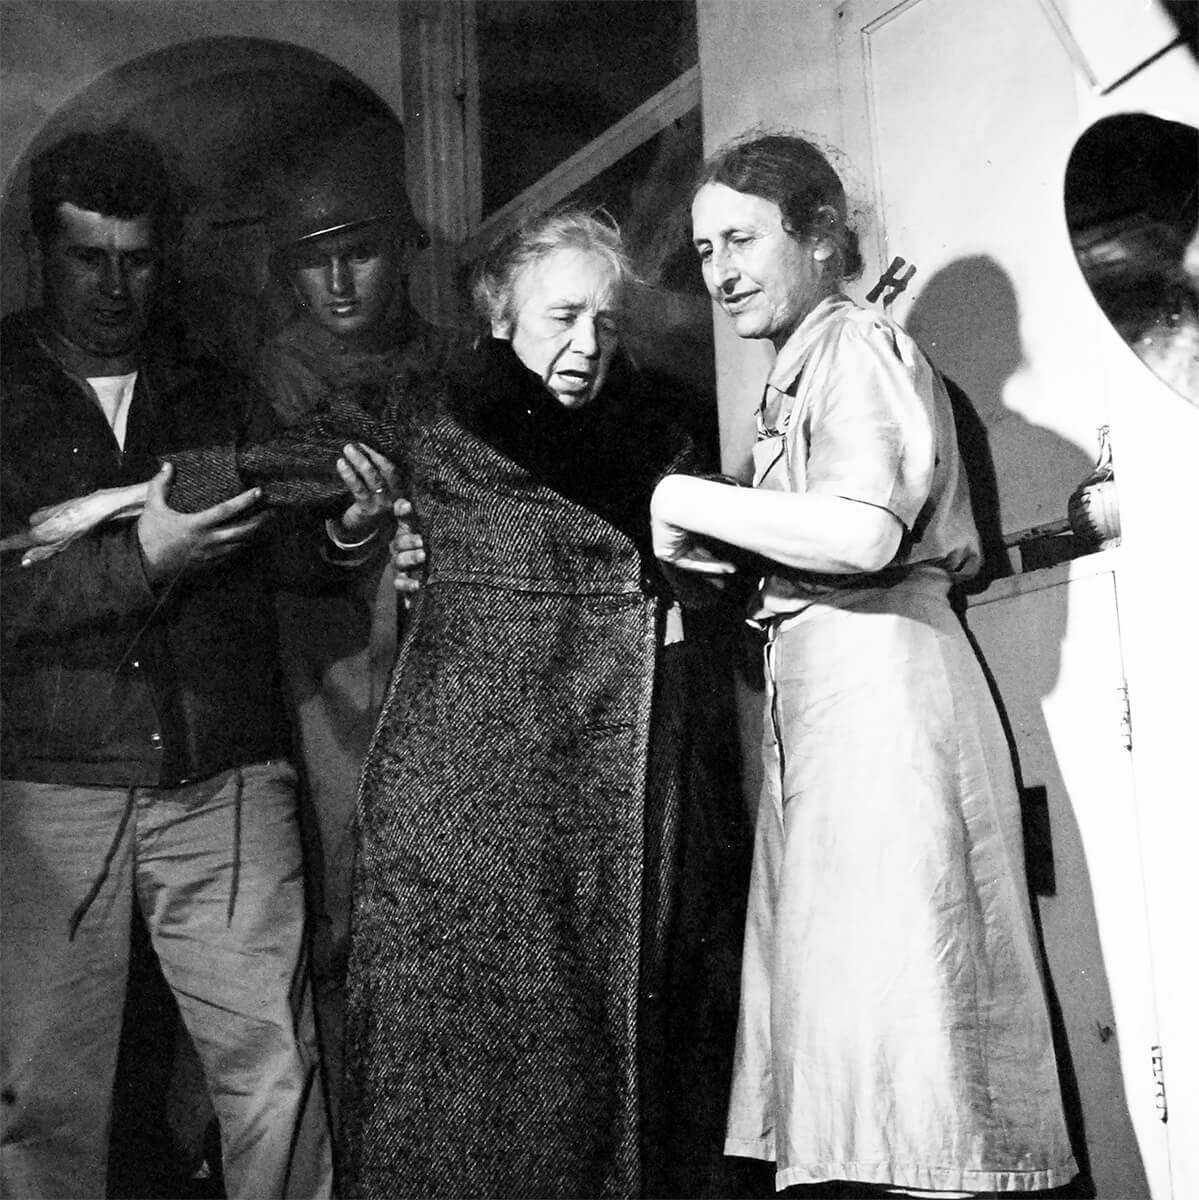 Mrs. Elizabeth Nash being freed from an internment camp in Saitama Prefecture, Japan, Sep 1945,  National Museum of the United States Navy<p>© Wayne Miller</p>